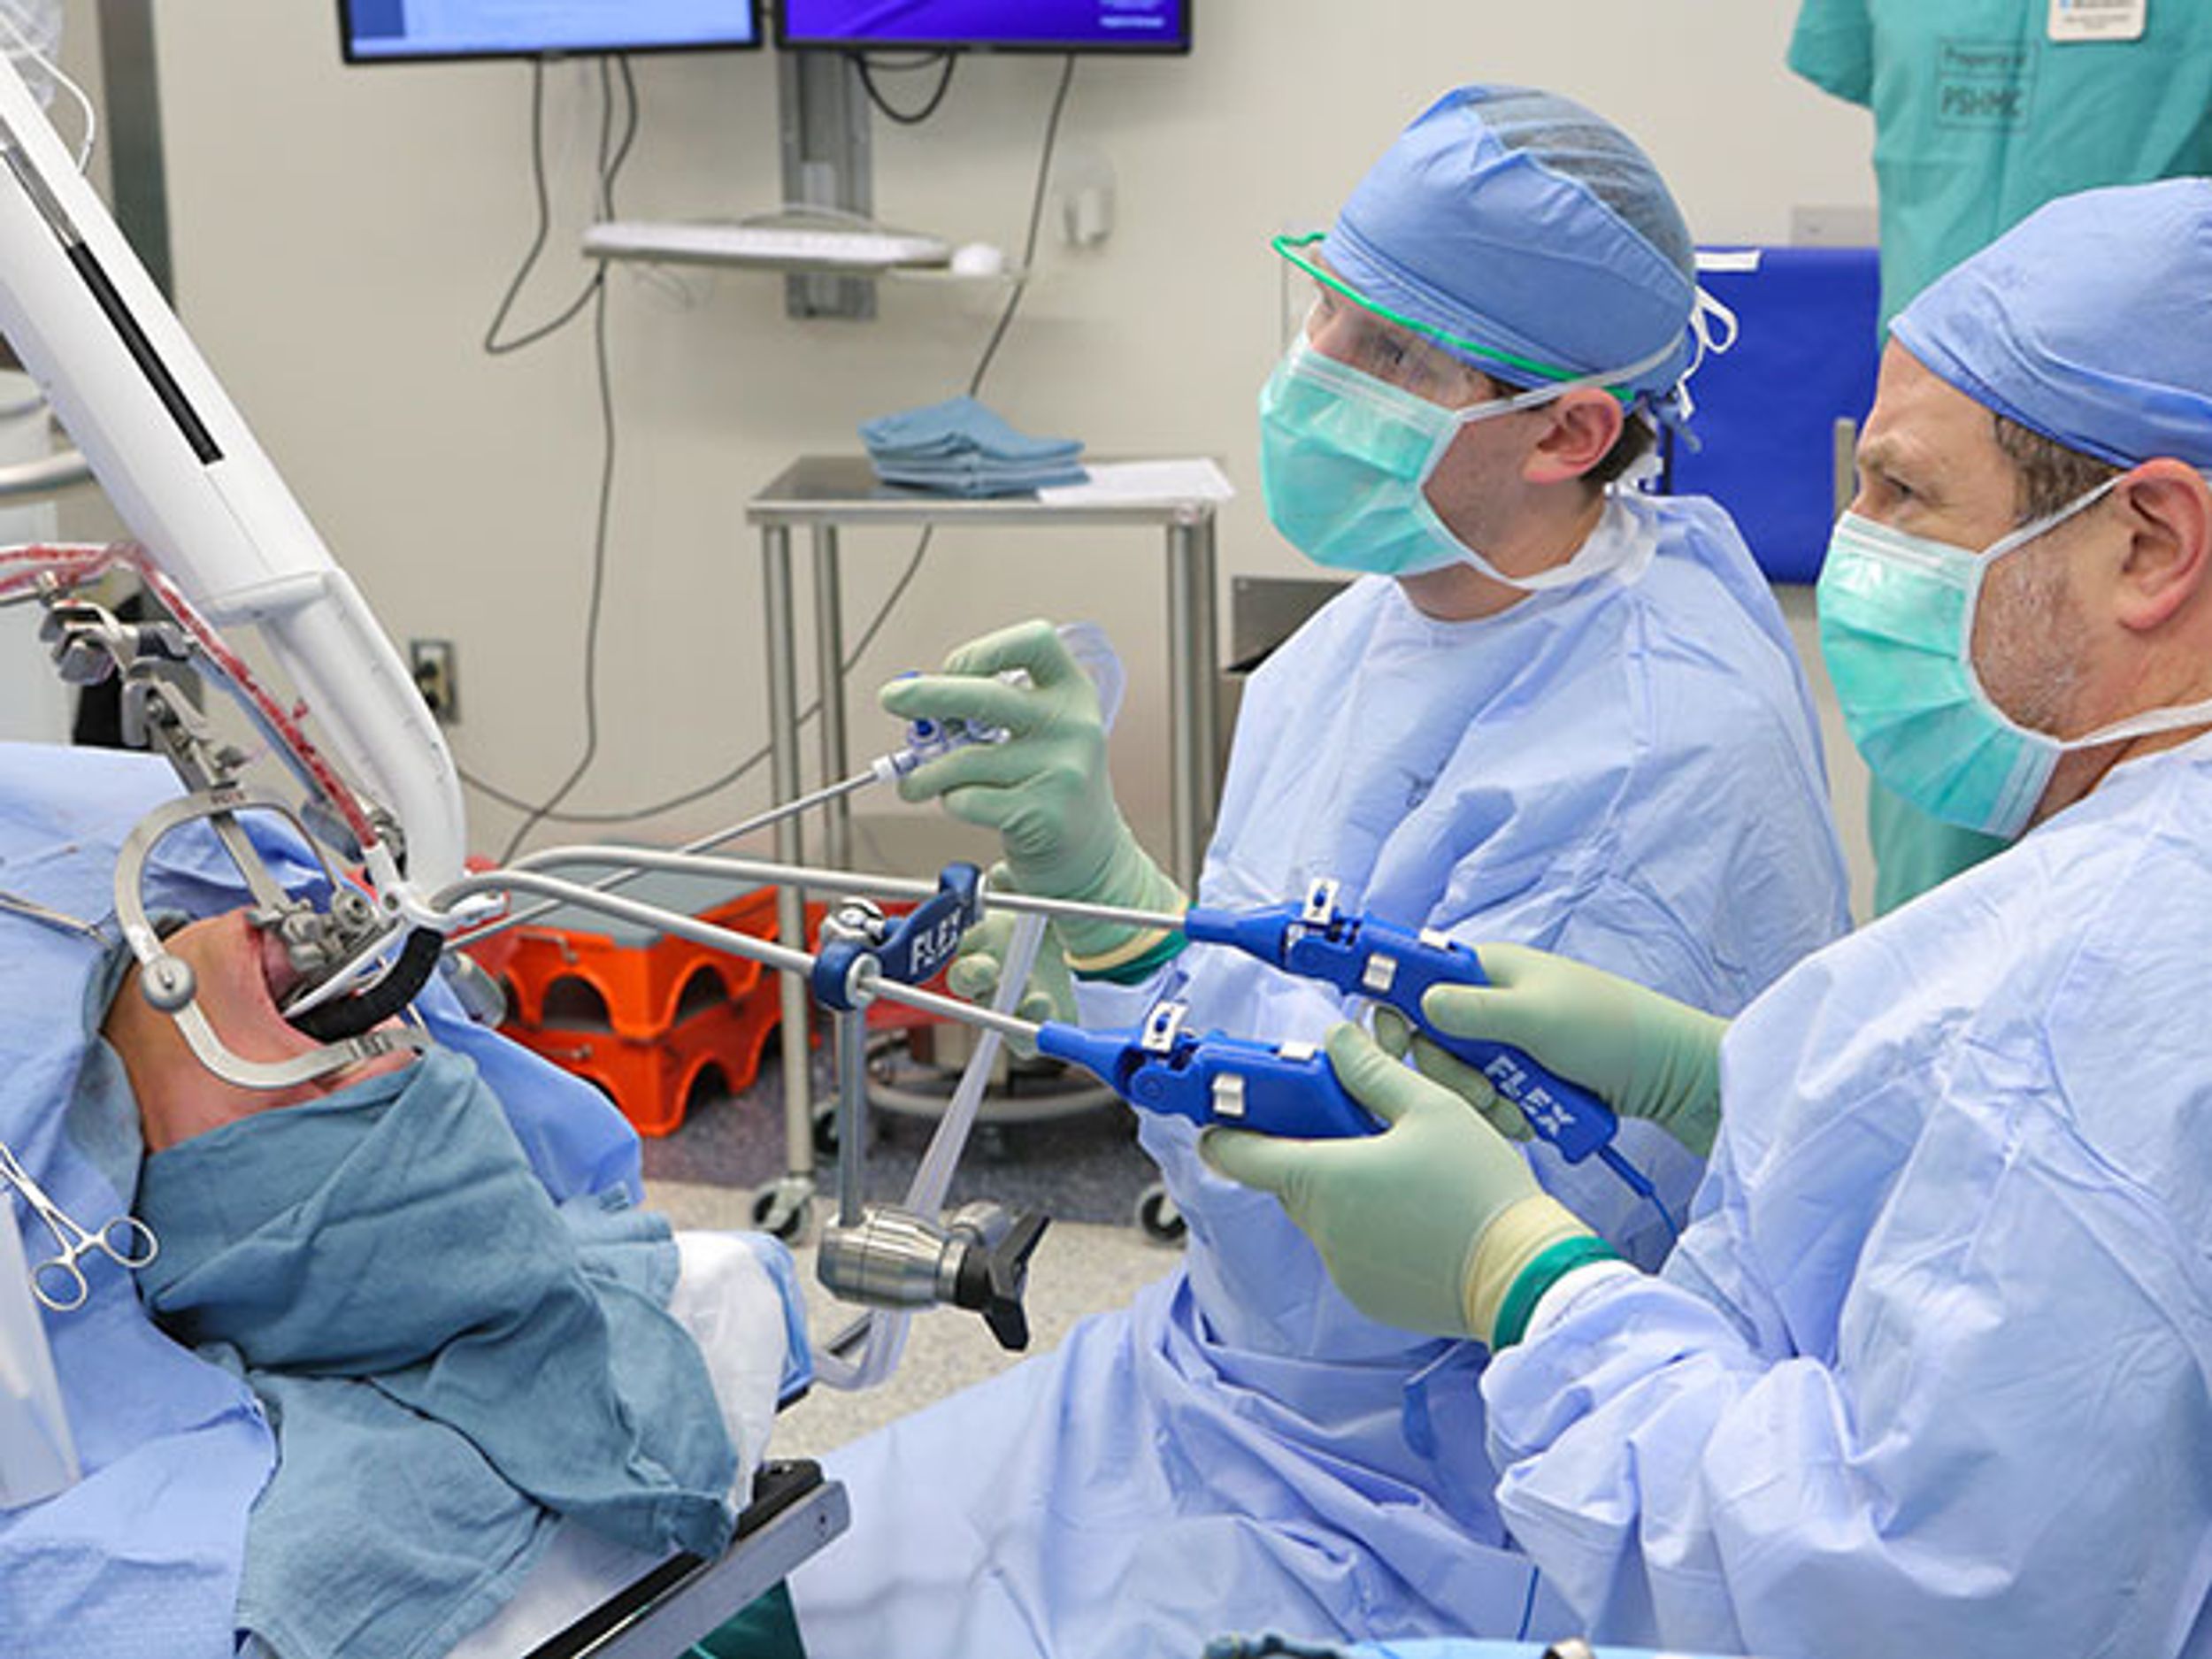 Two surgeons lean over a patient's head and insert the Flex surgical robot from Medrobotics into the patient's mouth